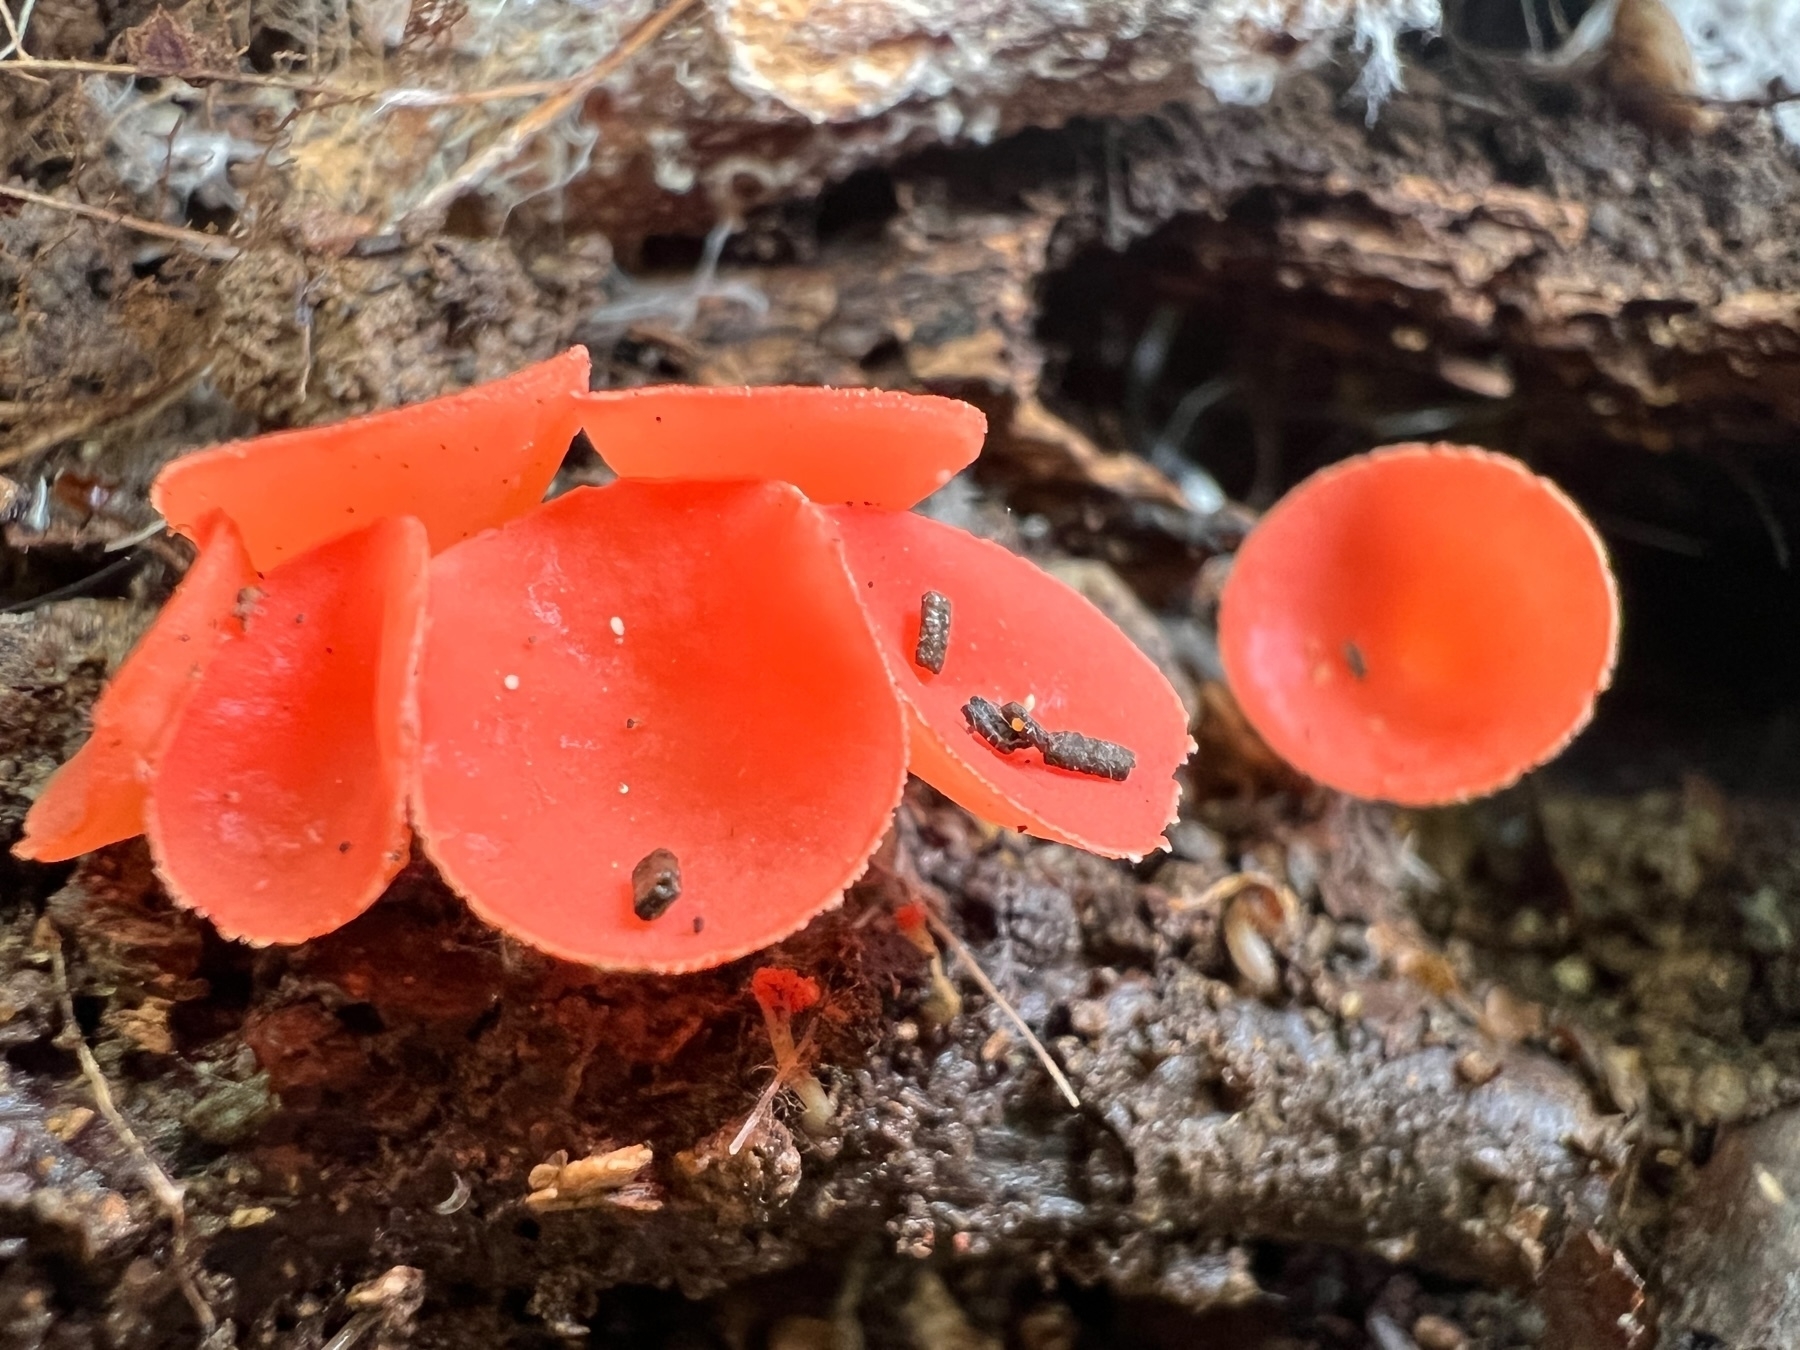 A cluster of very tiny, bright red-pink-orange cup shaped mushrooms growing from rich soil and organic matter.